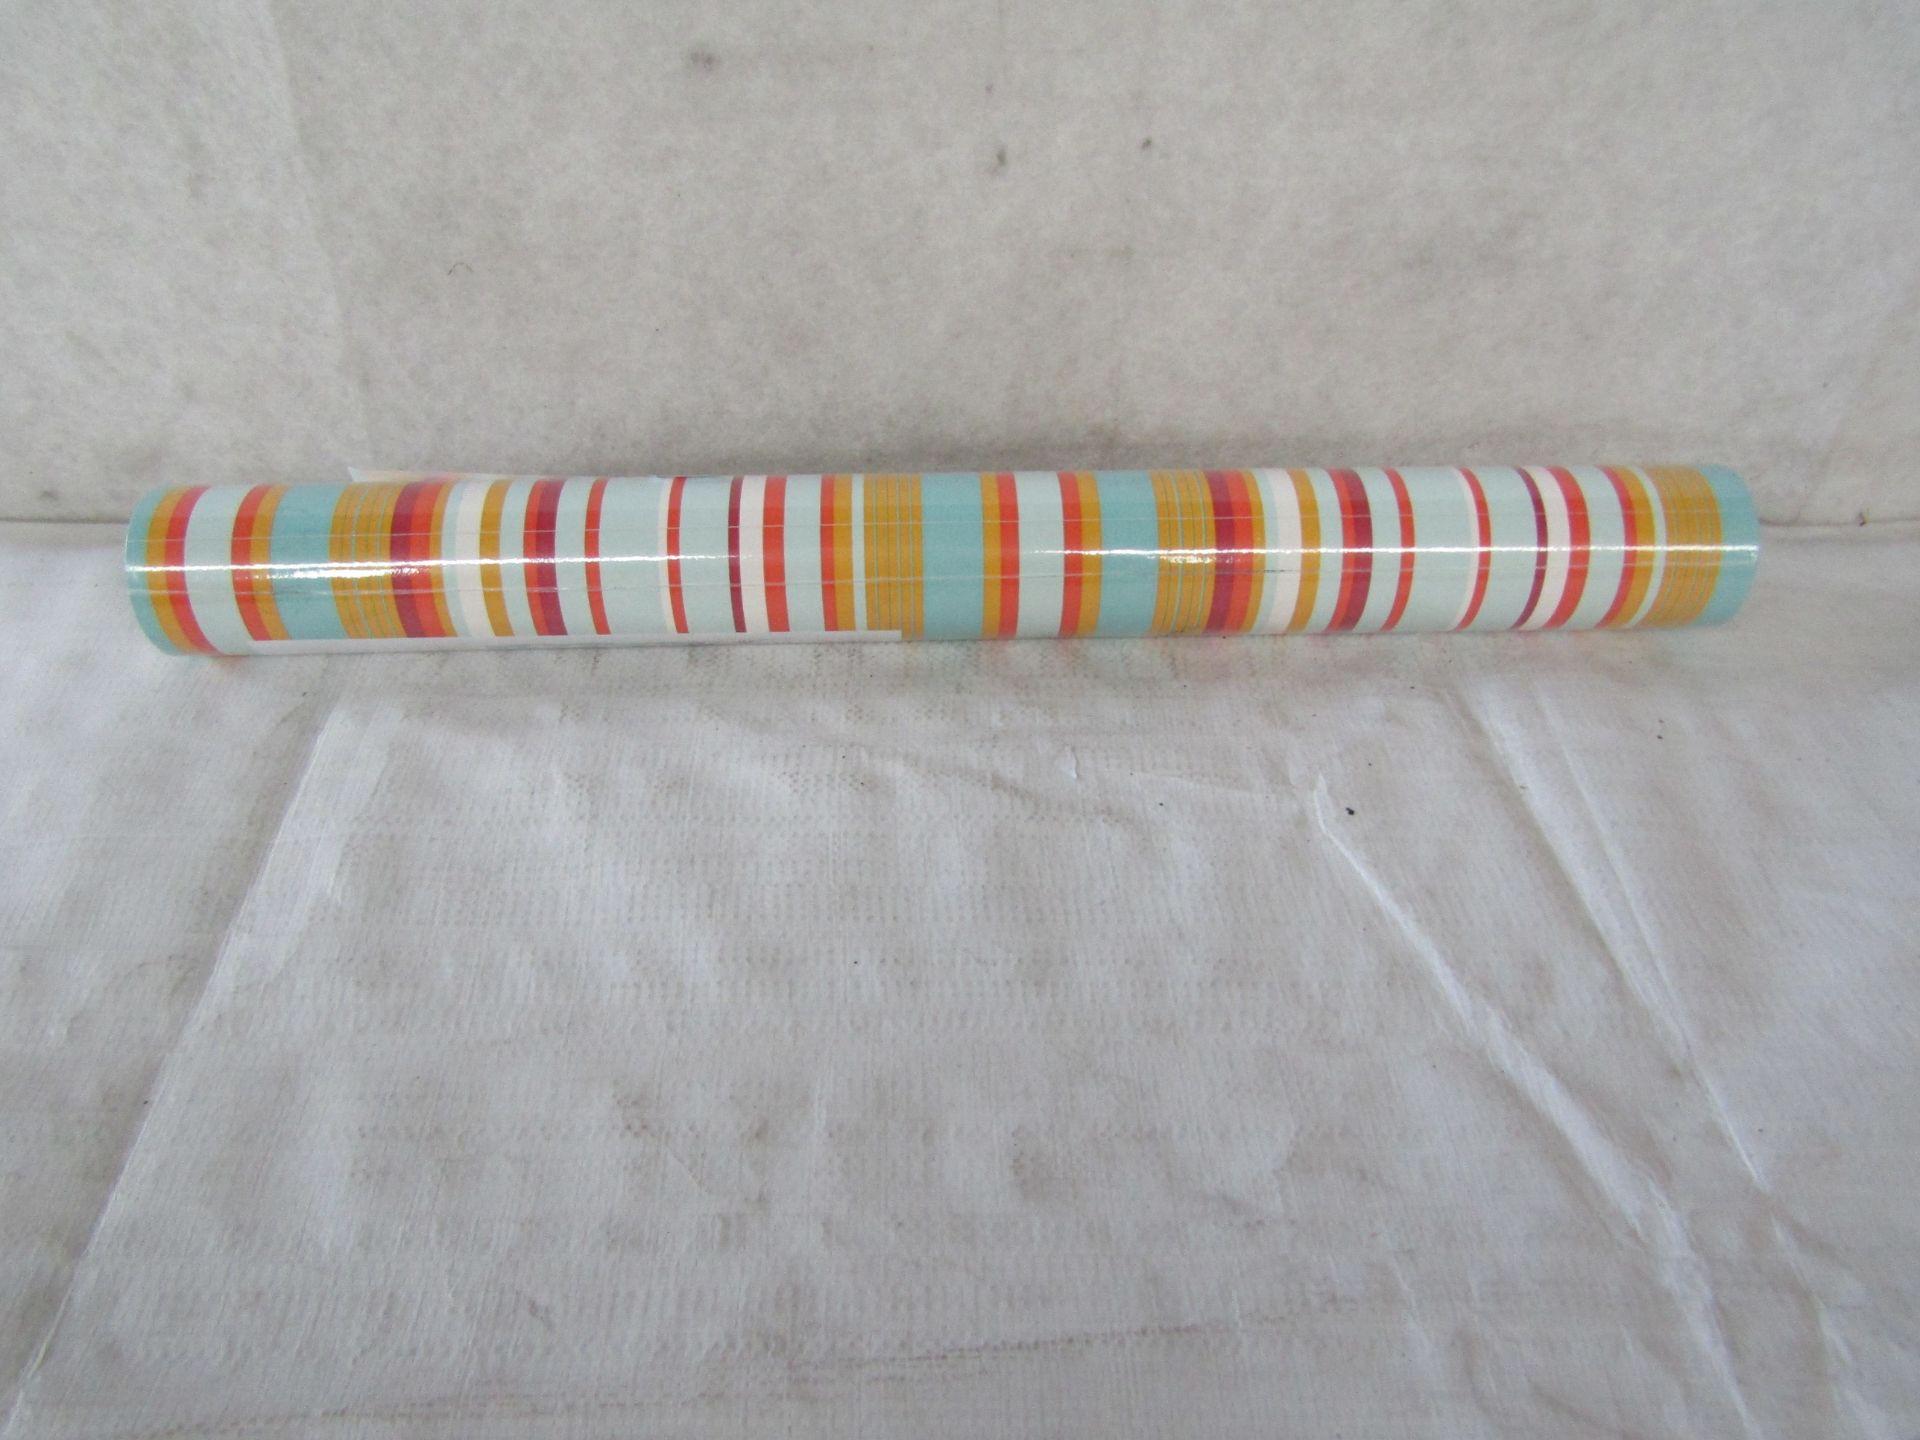 12X DeckChairStripes - Multi Pattern Repeat Wallpaper - Size 10.05m X 52cm - New & Packaged.